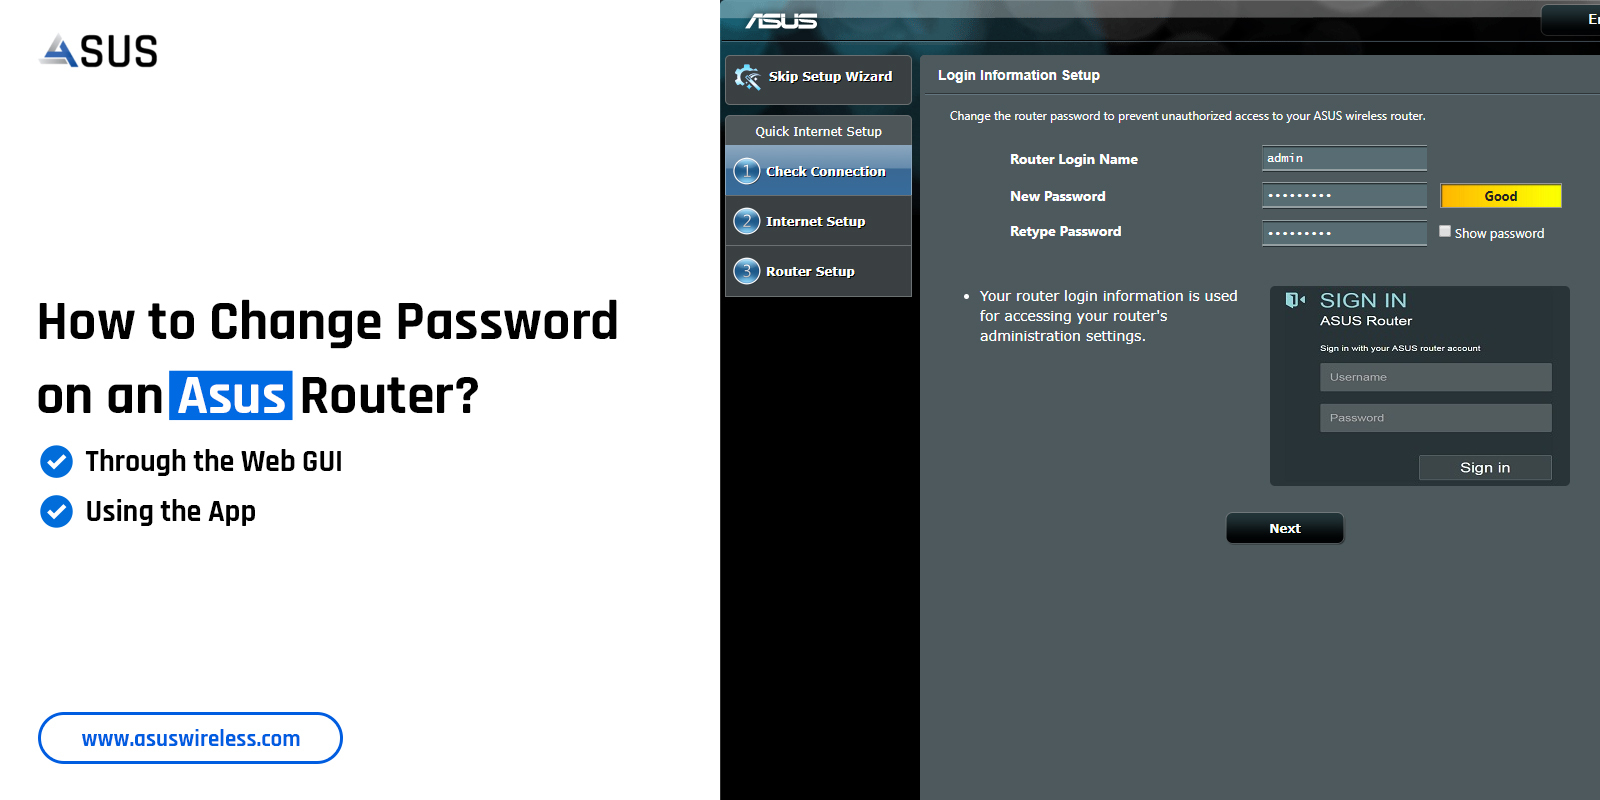 How to Change Password on Asus Router